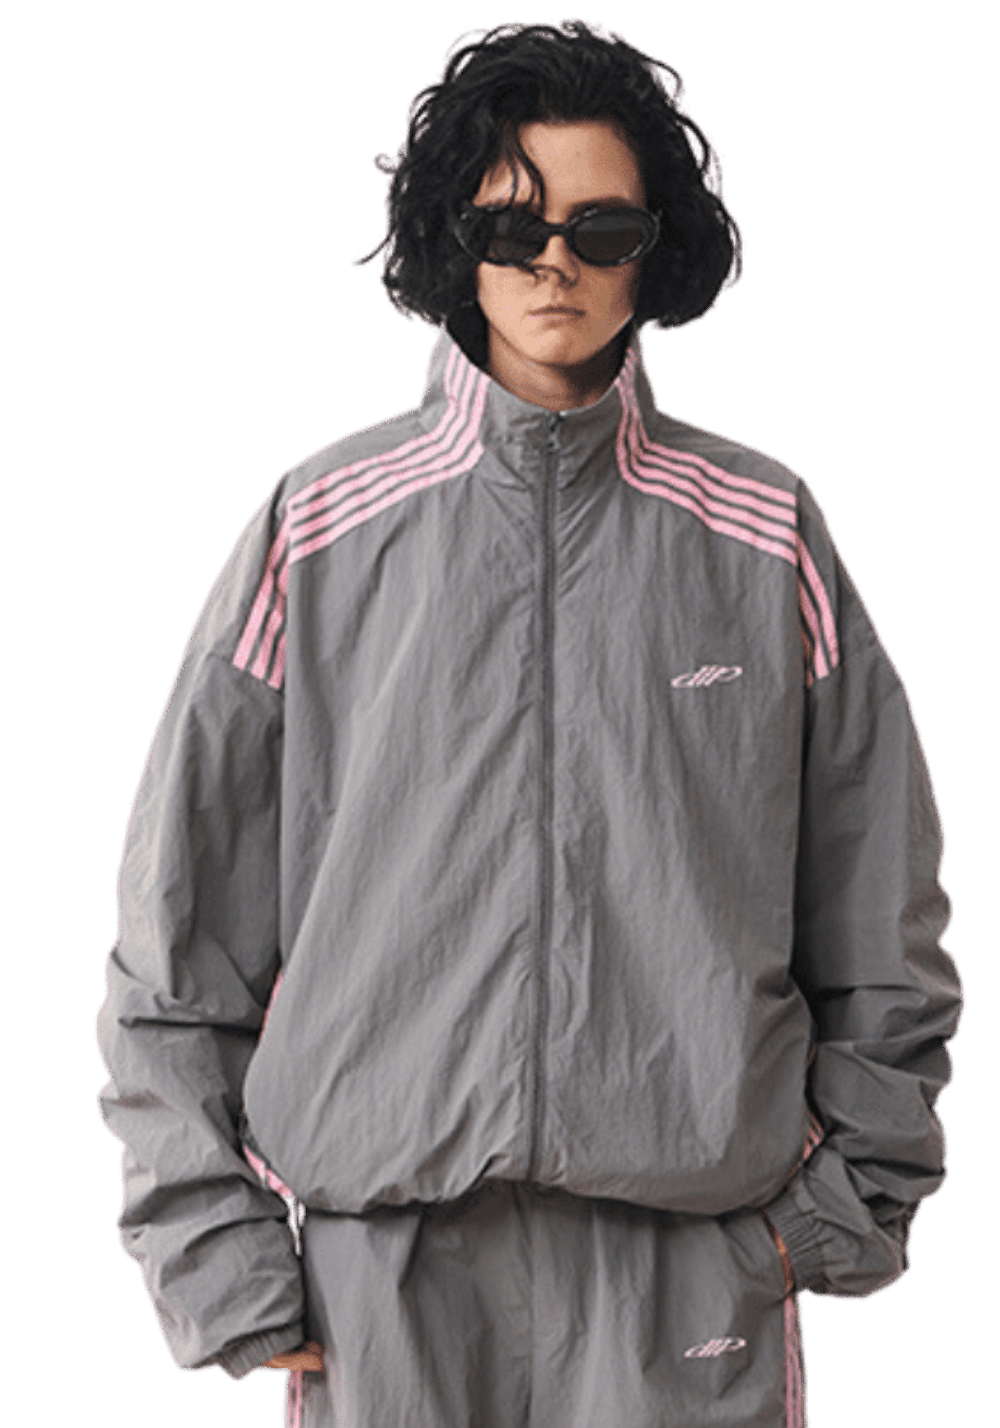 Striped Zip Up Casual Jacket - PSYLOS 1, Striped Zip Up Casual Jacket, Jacket, MODITEC, PSYLOS 1